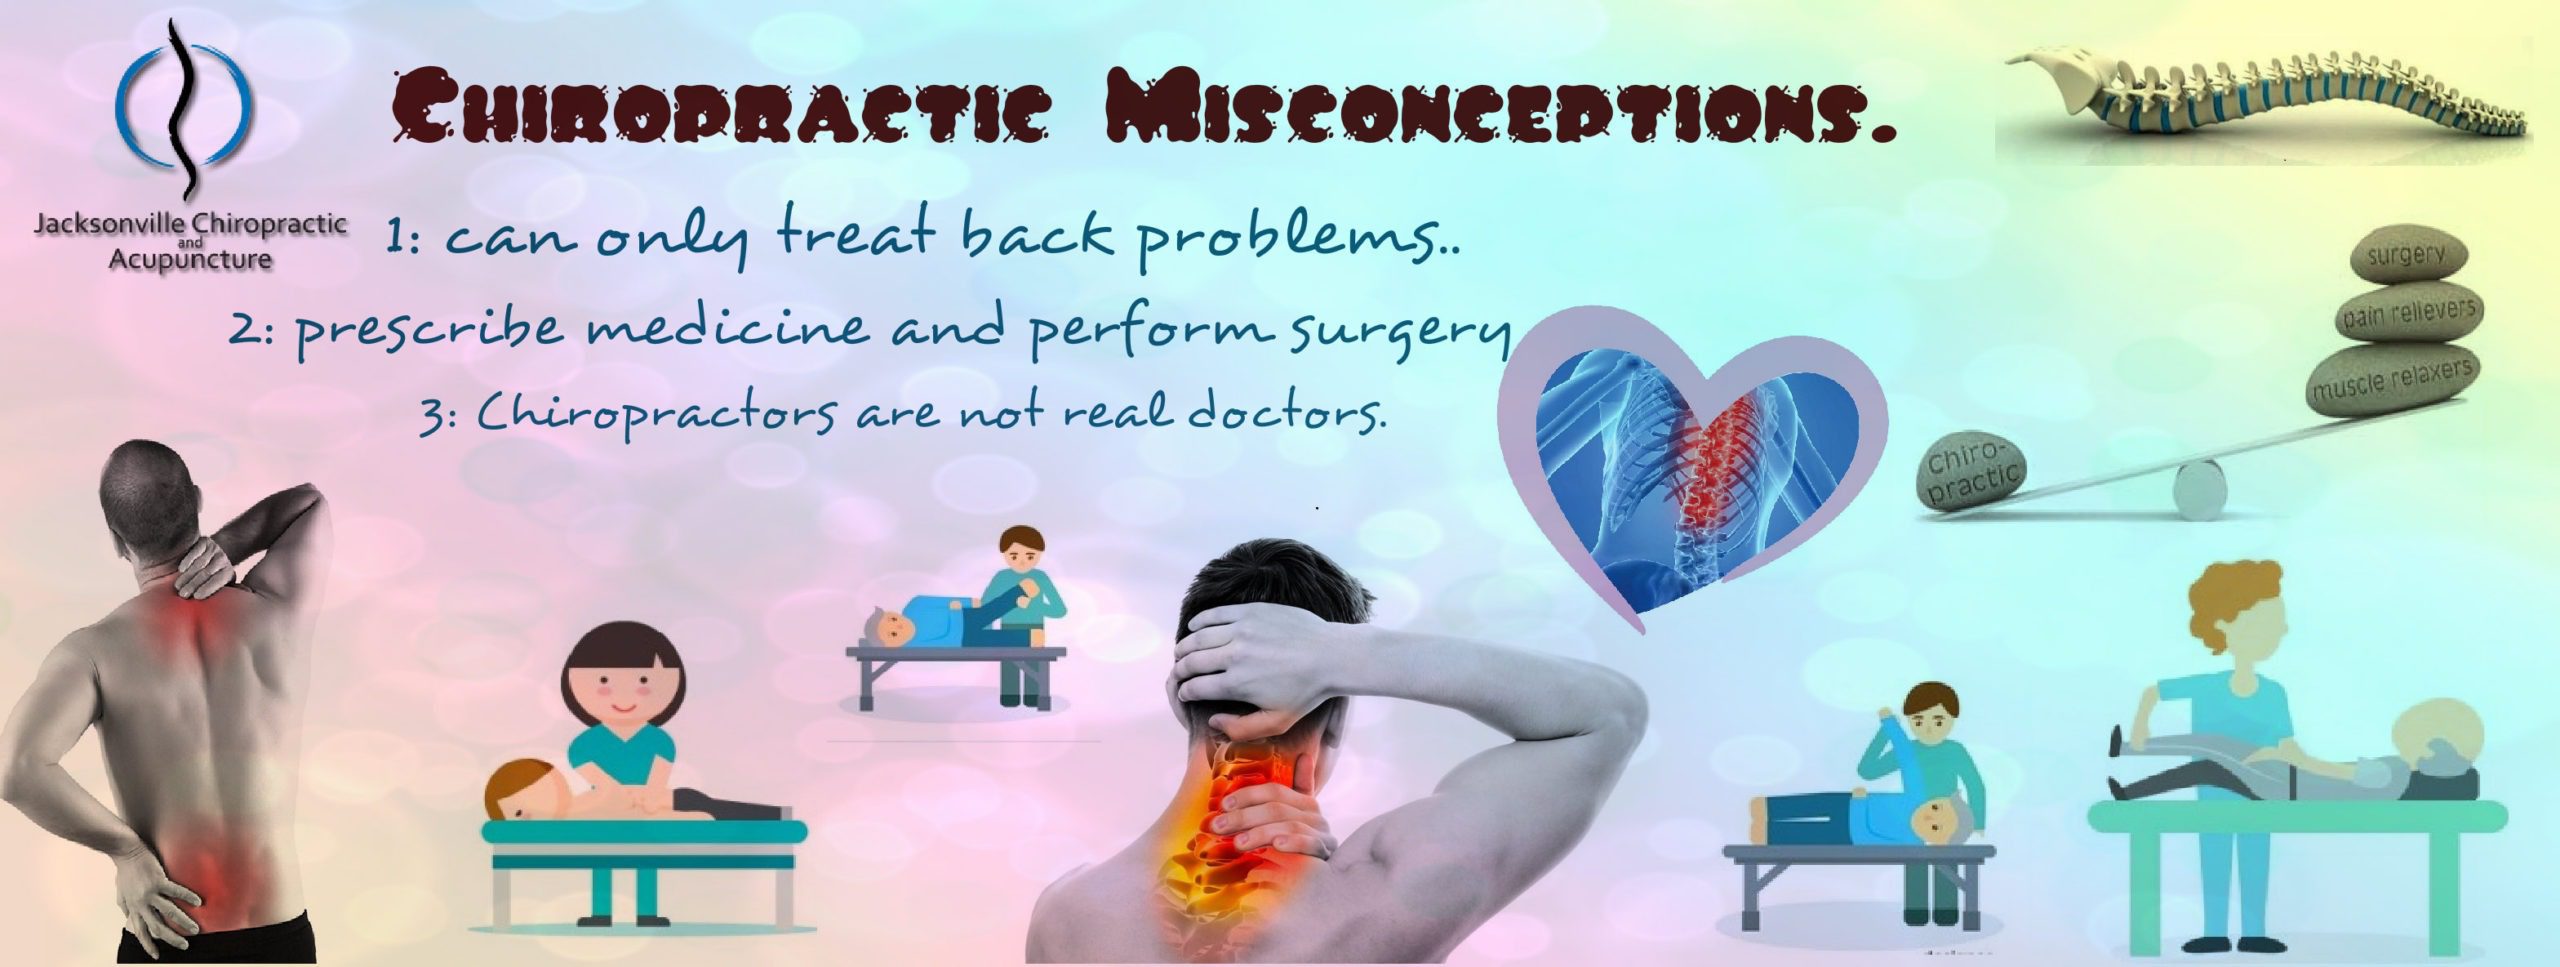 Some-Common-Chiropractic-Misconceptions